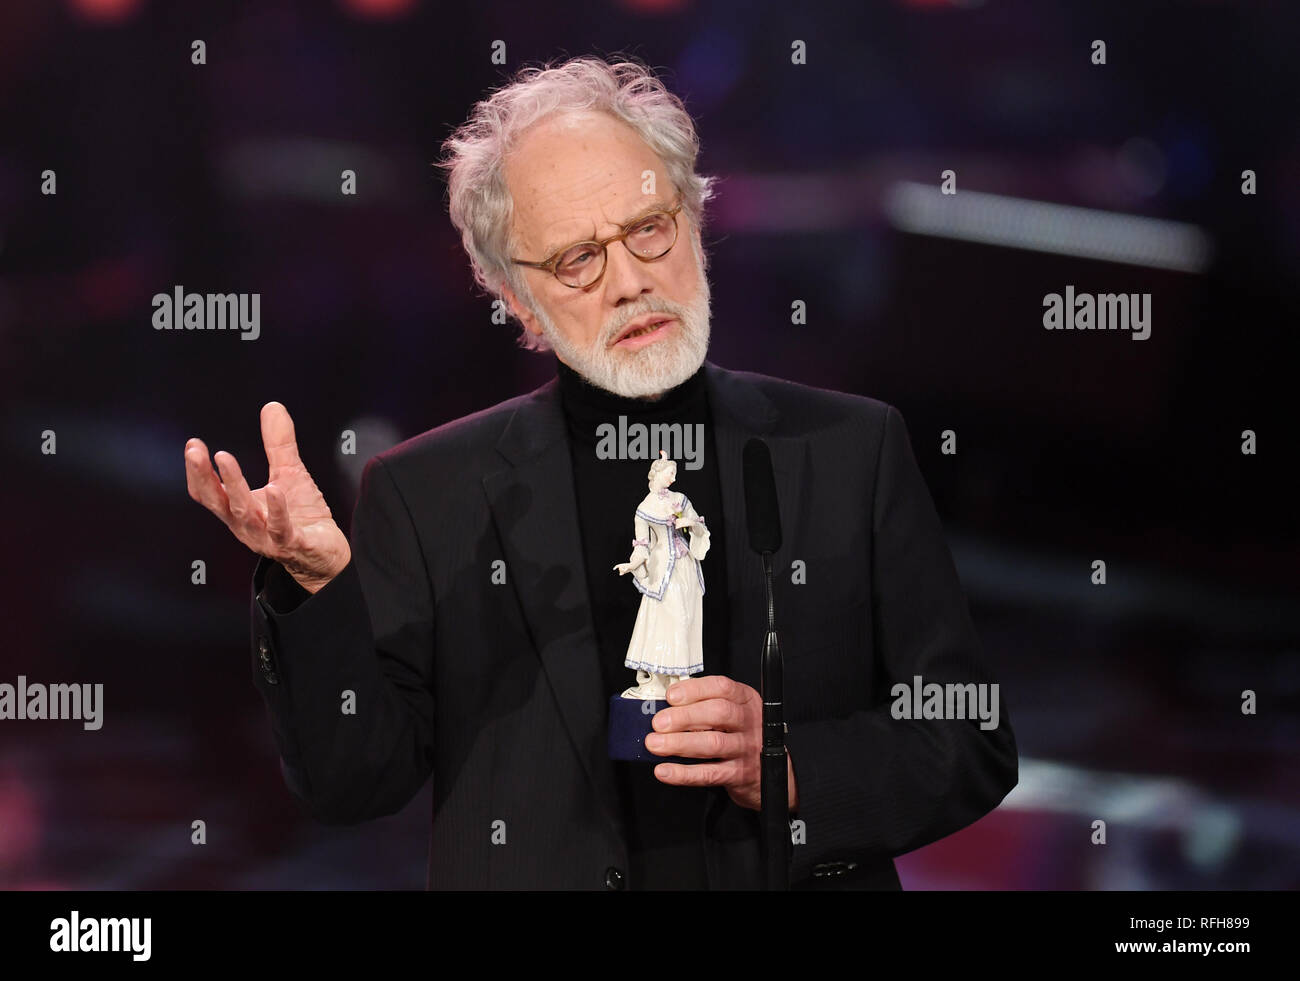 25 January 2019, Bavaria, München: Markus Imhoof, Swiss film director, is awarded the Bavarian Film Prize at the Prinzregententheater. Imhoof was awarded the documentary film prize for the film 'Eldorado'. Photo: Tobias Hase/dpa Stock Photo